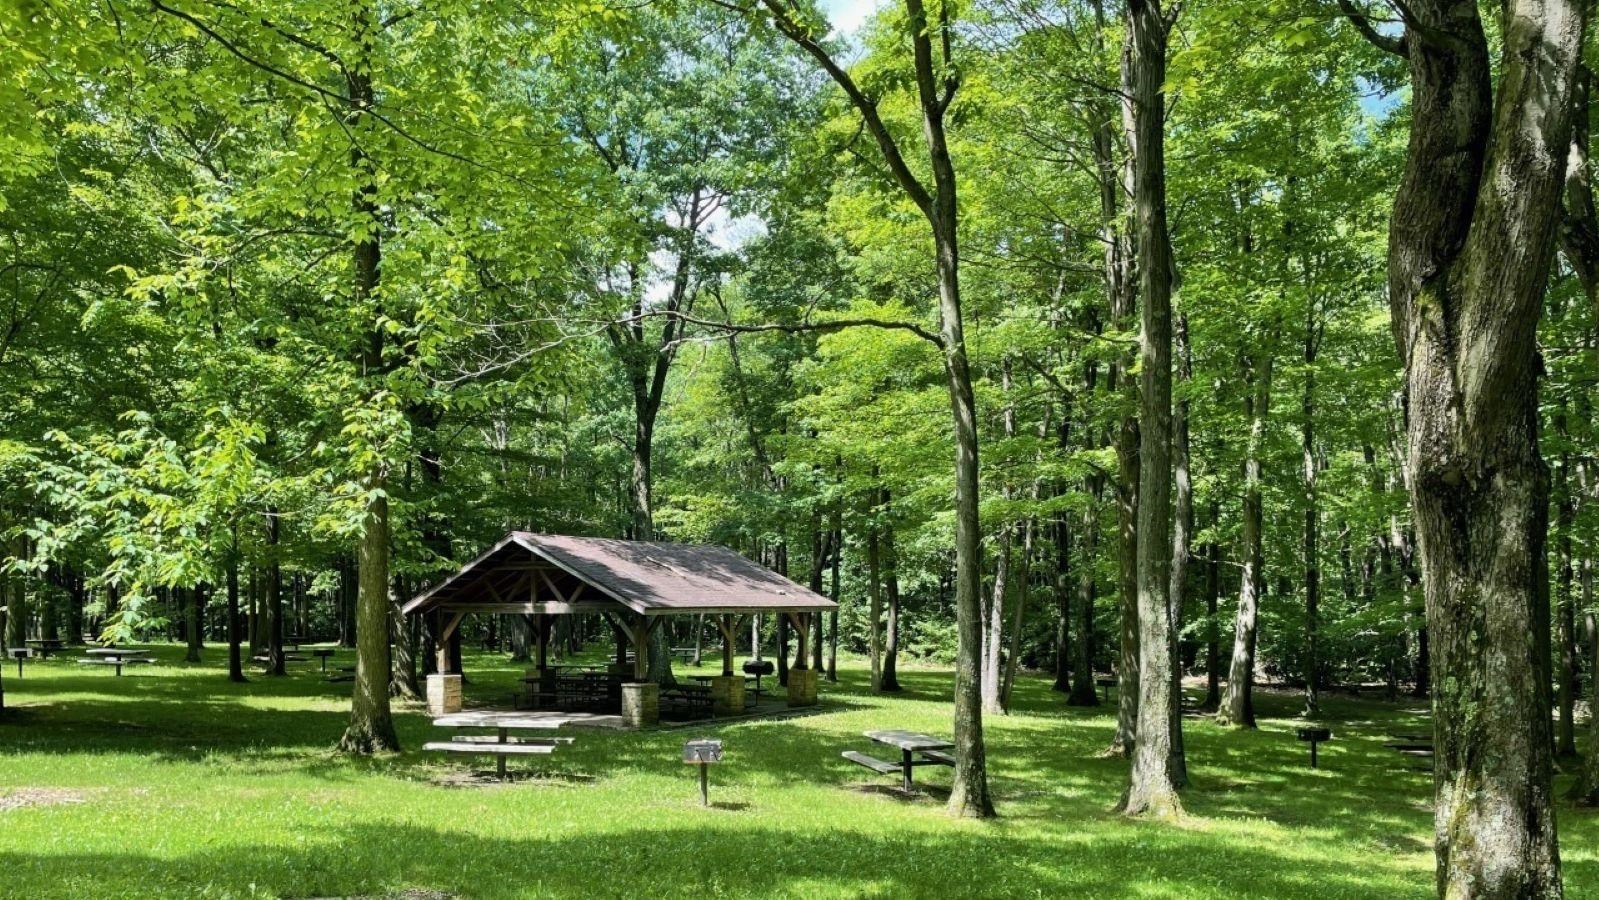 A picnic pavilion surrounded by trees